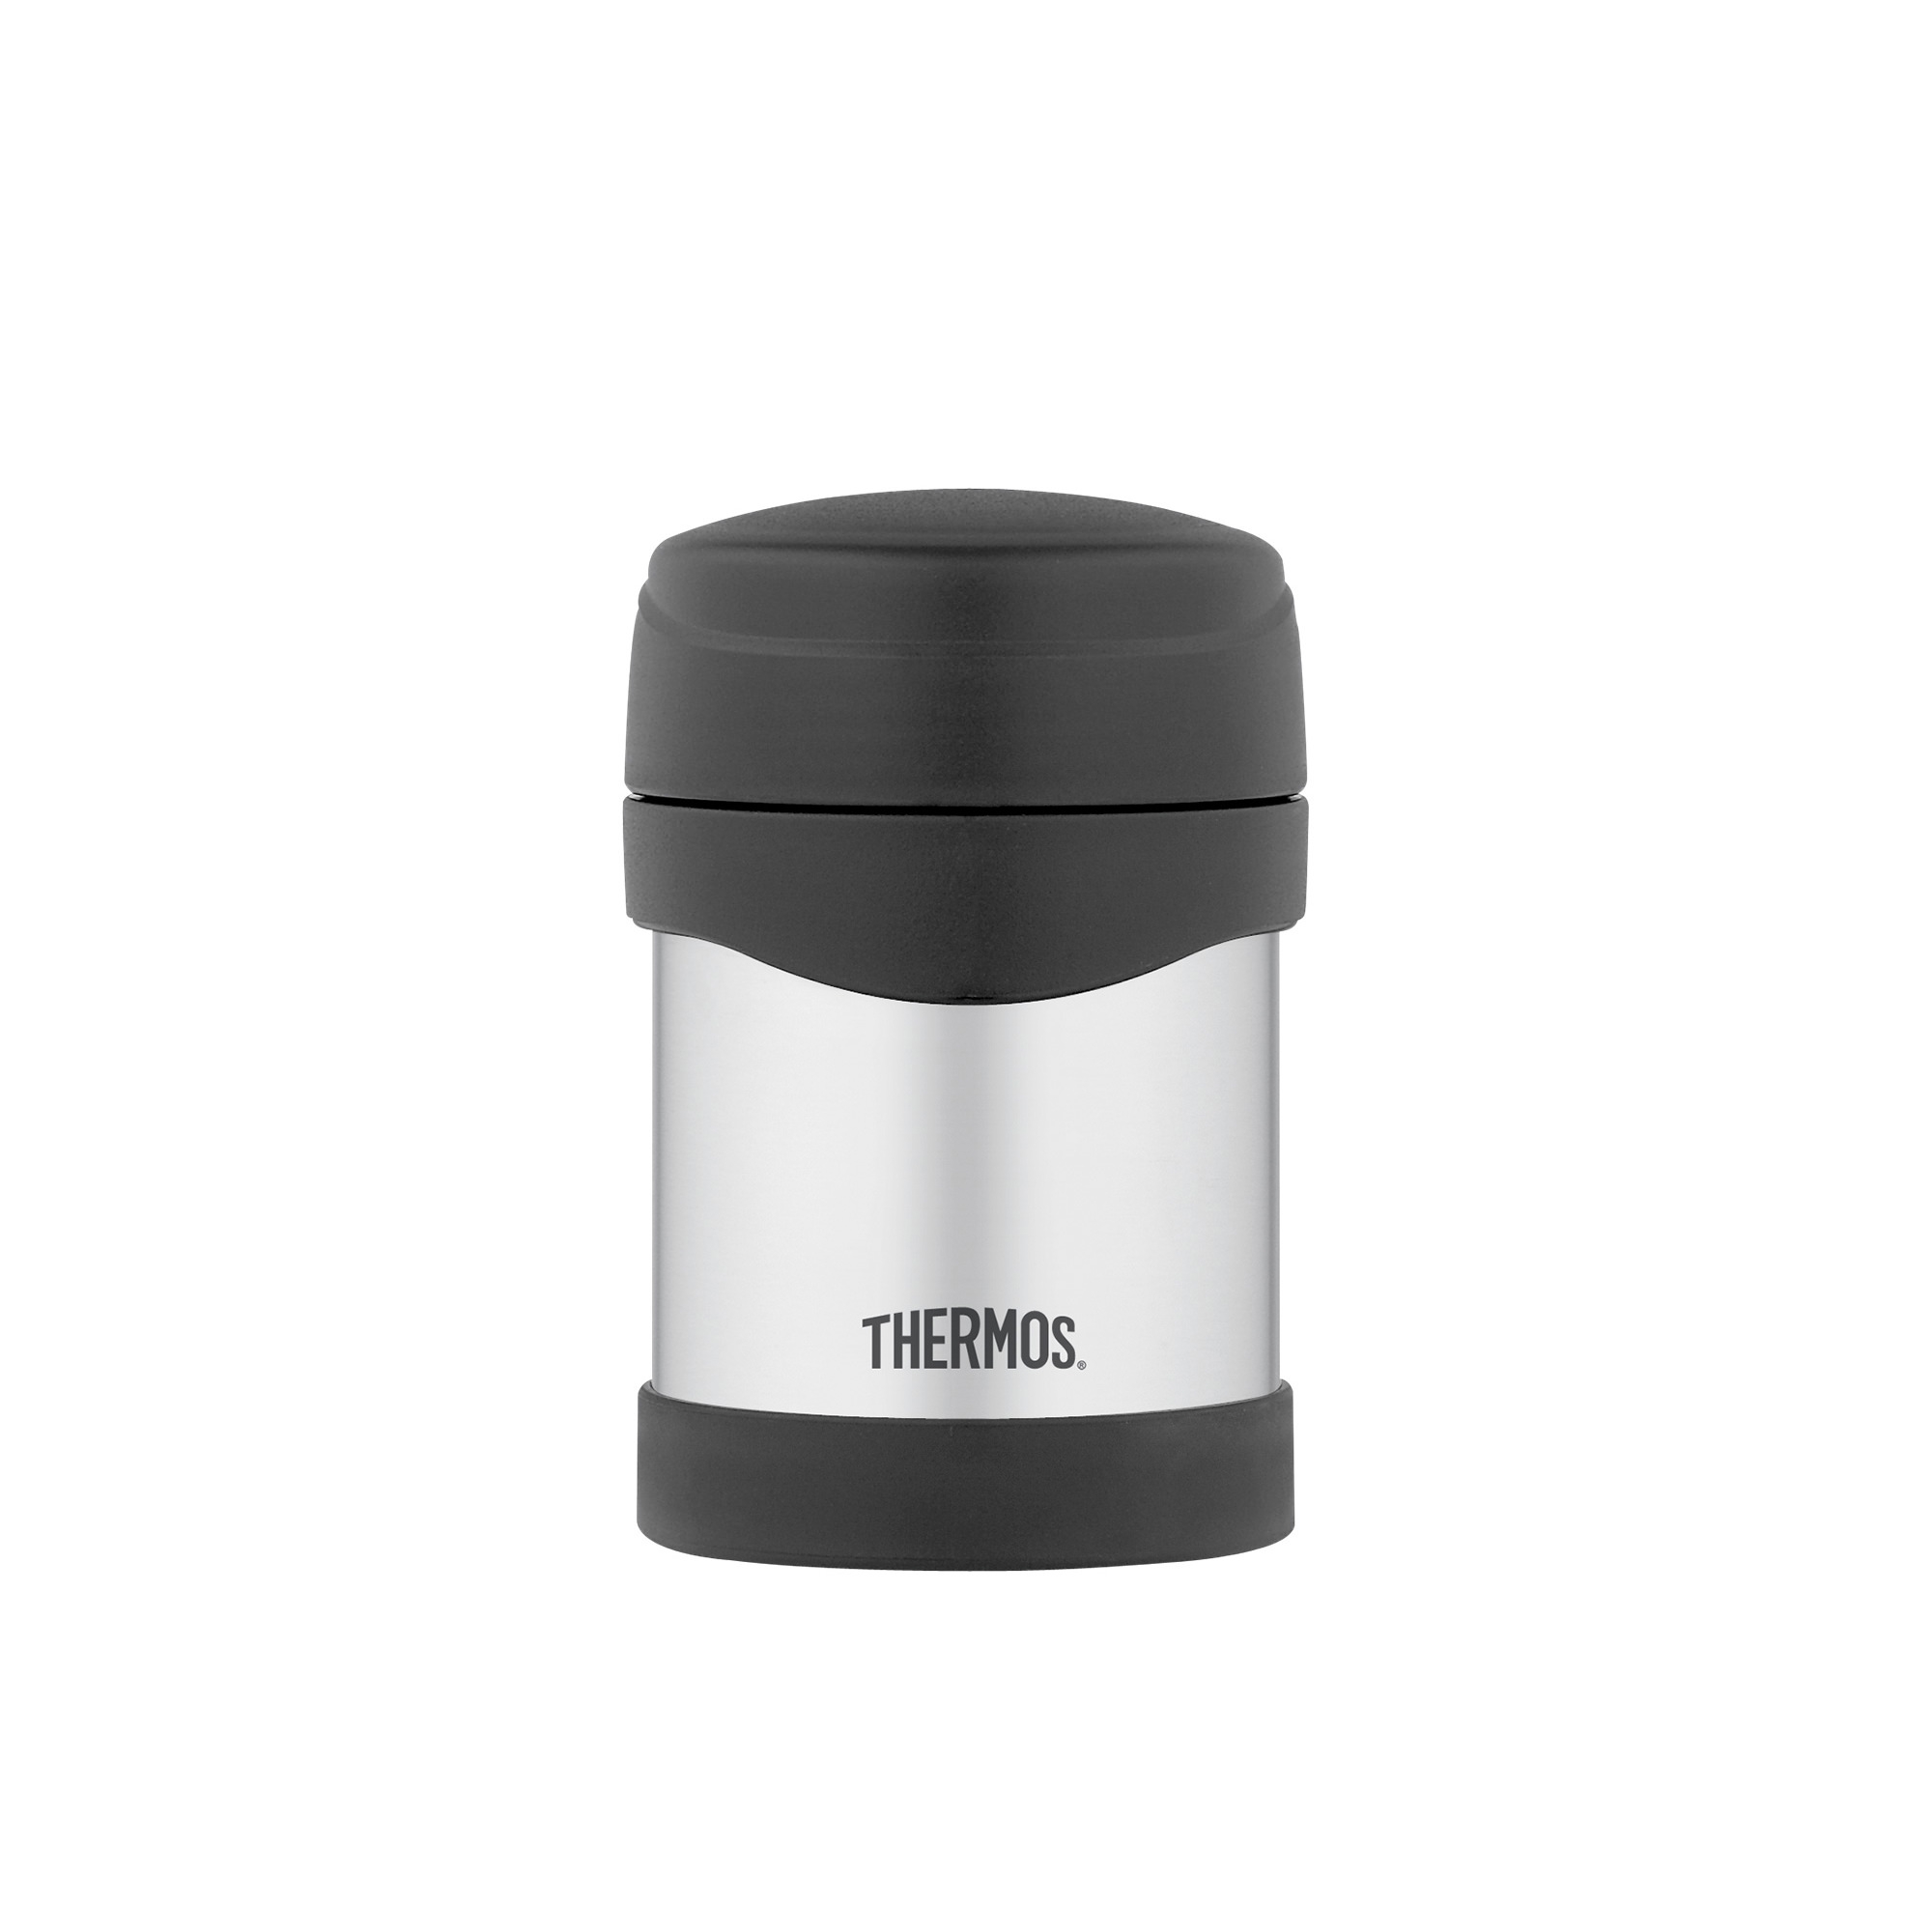 Thermos Stainless Steel Food Flask 290ml Image 1